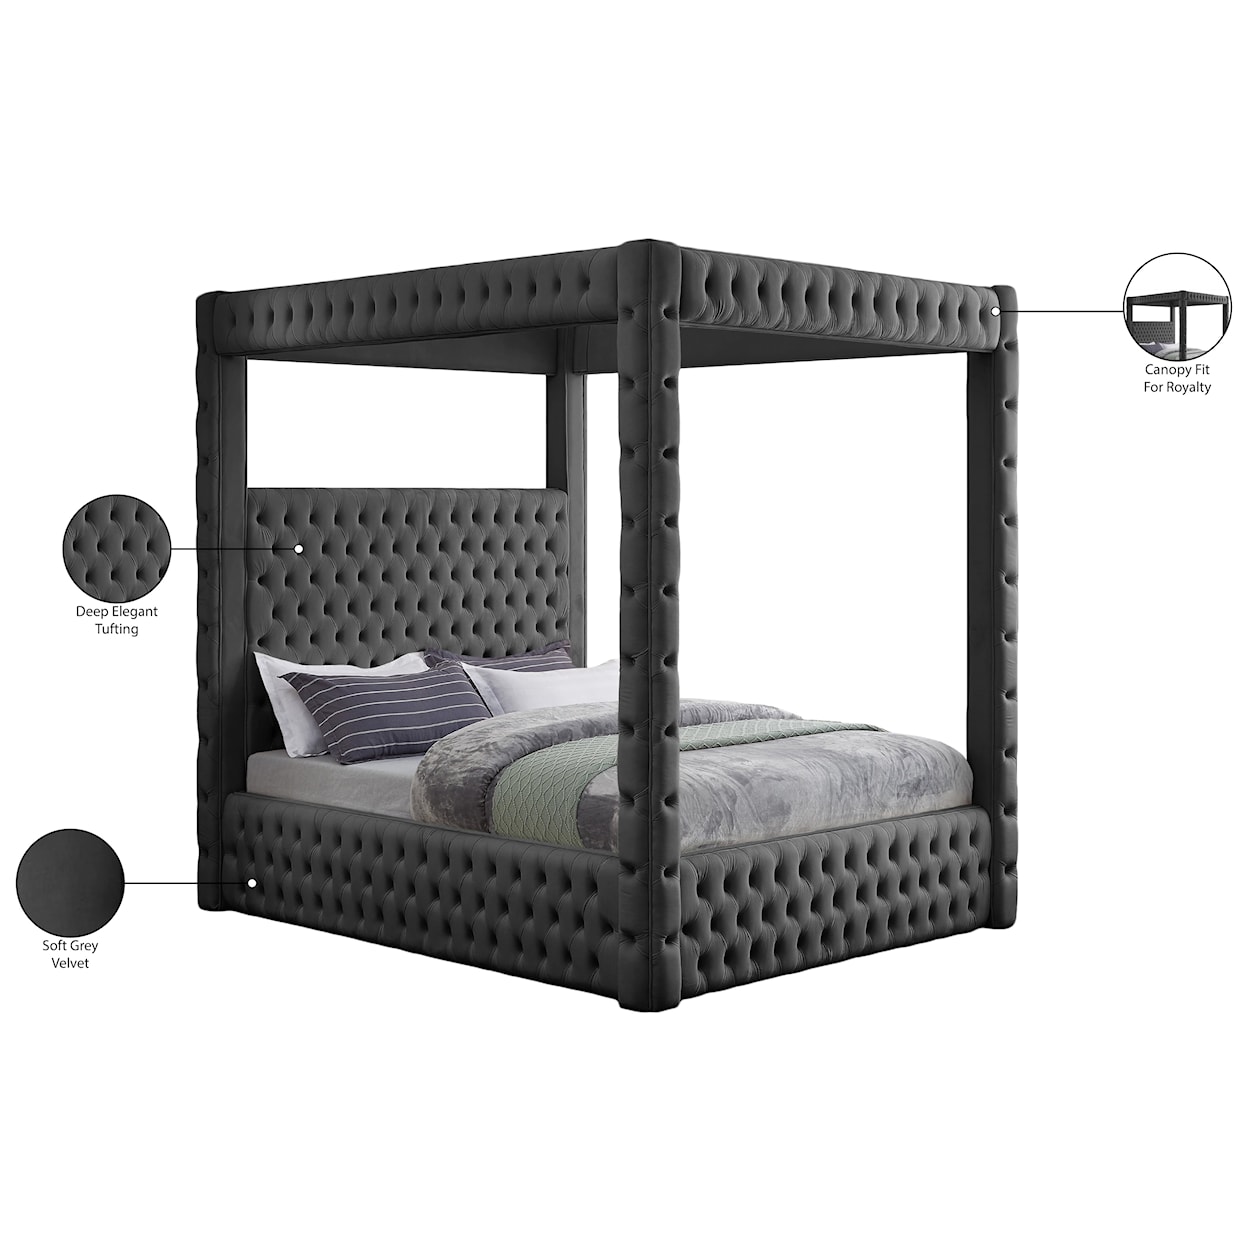 Meridian Furniture Royal Queen Bed (4 Boxes)